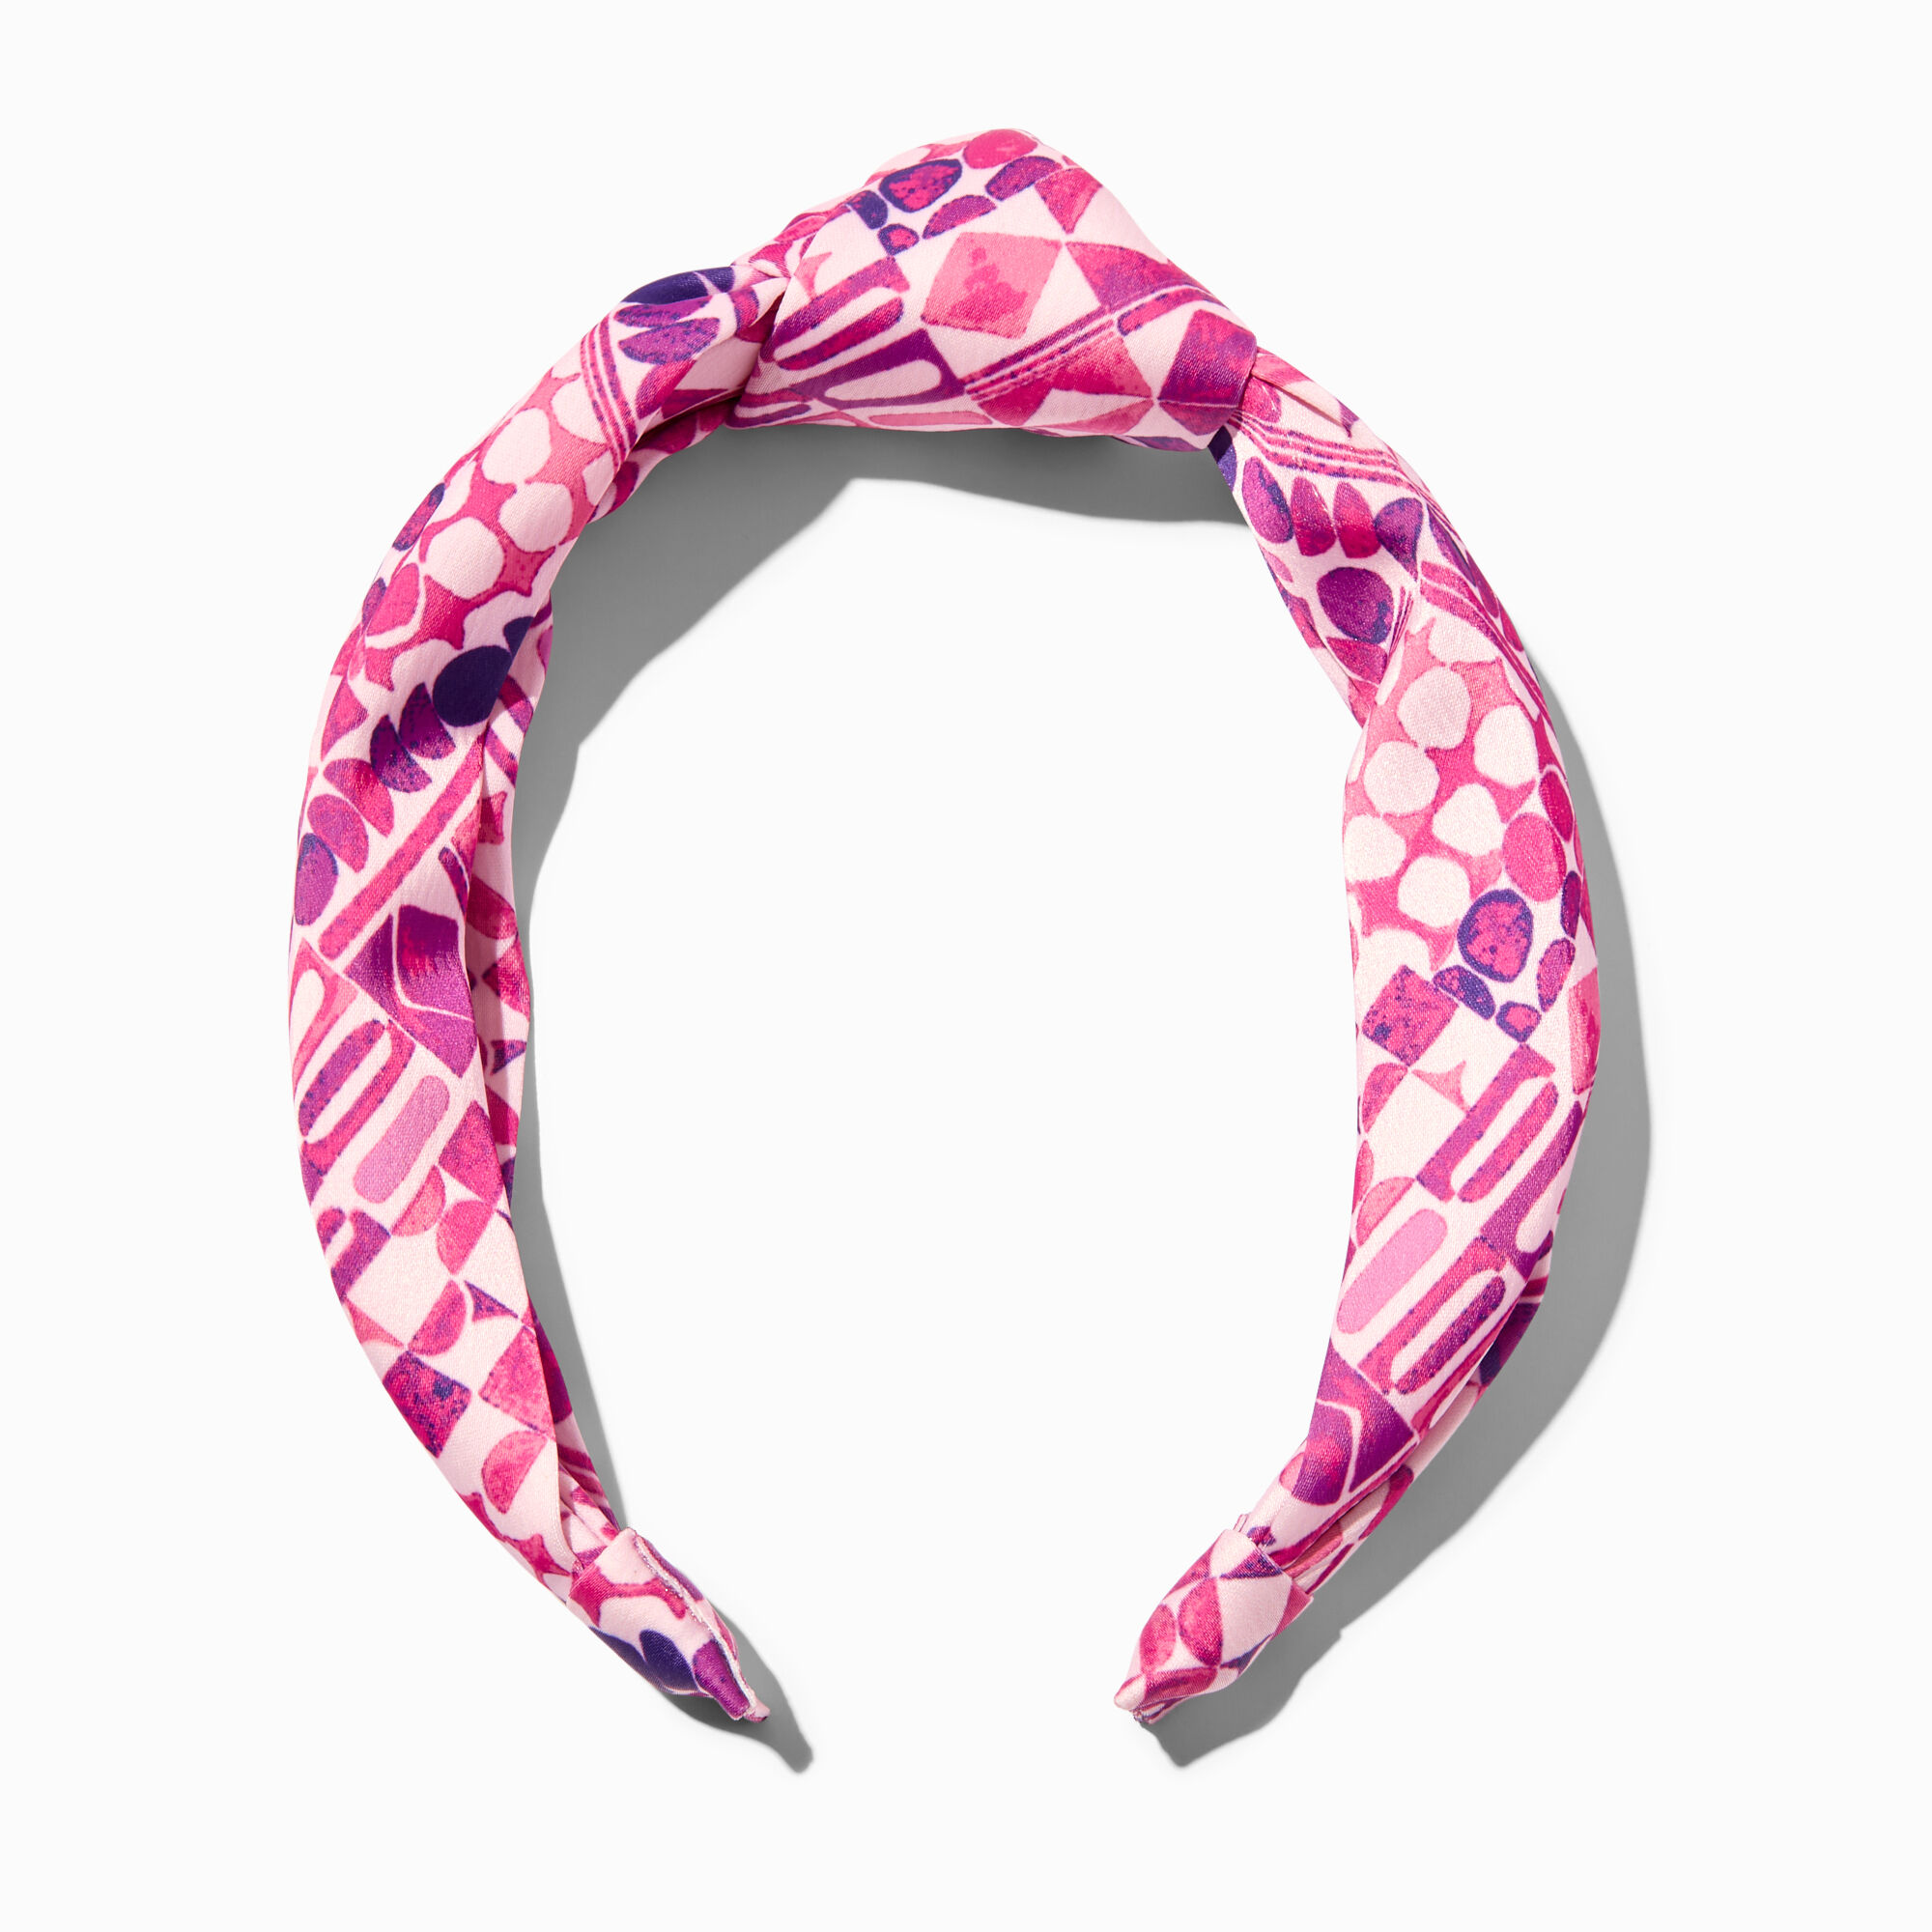 View Claires Geometric Print Knotted Headband Pink information